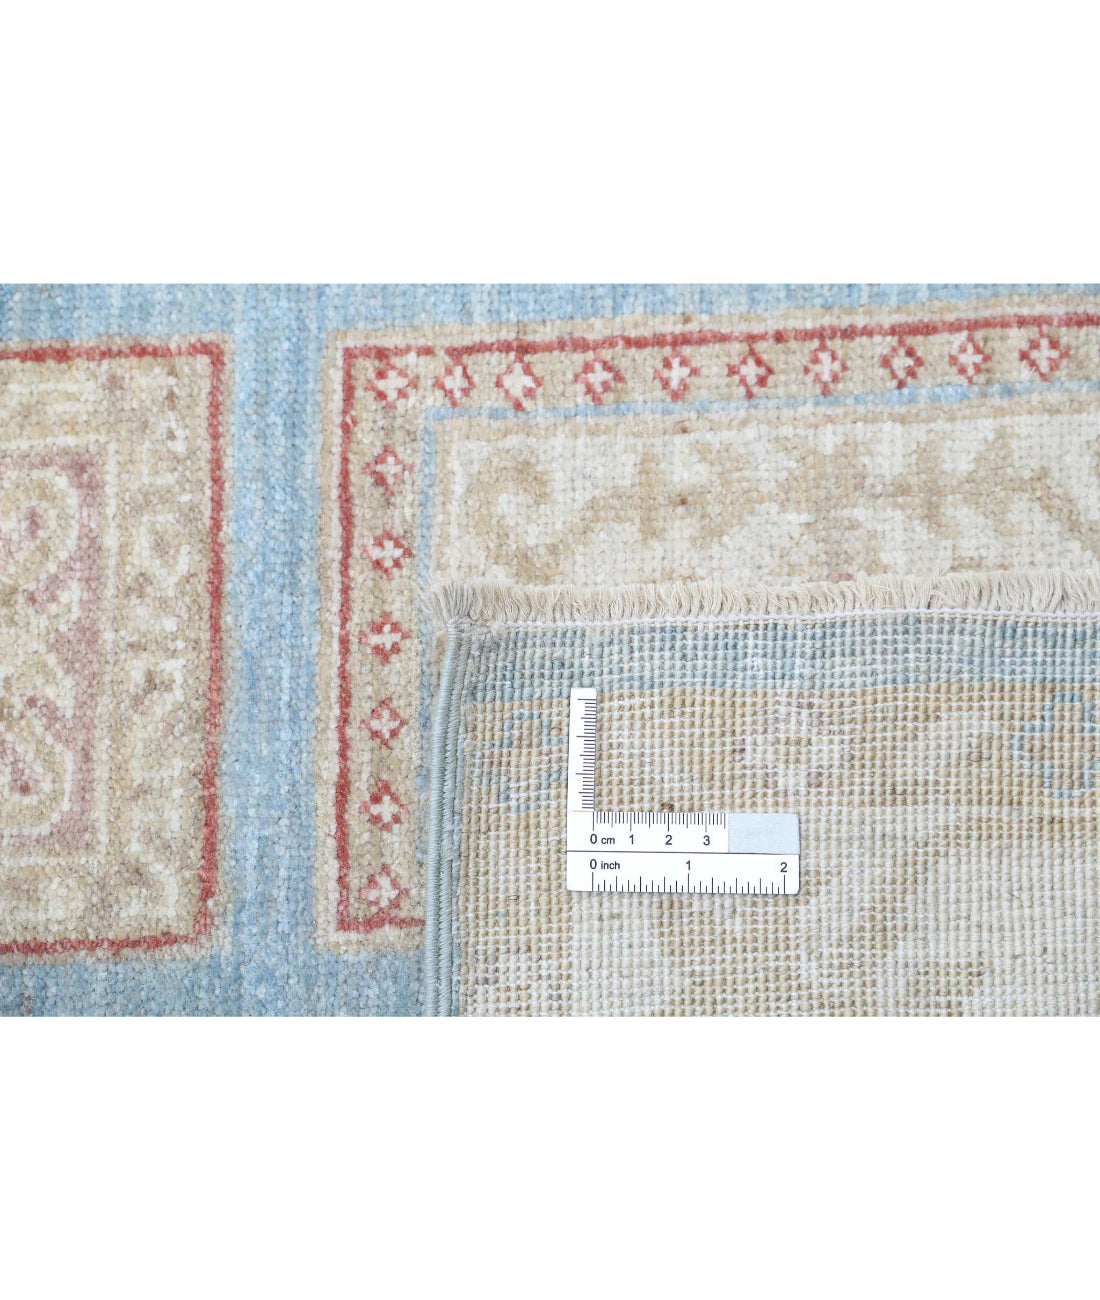 Hand Knotted Serenity Wool Rug - 2'7'' x 10'1'' 2'7'' x 10'1'' (78 X 303) / Blue / Ivory